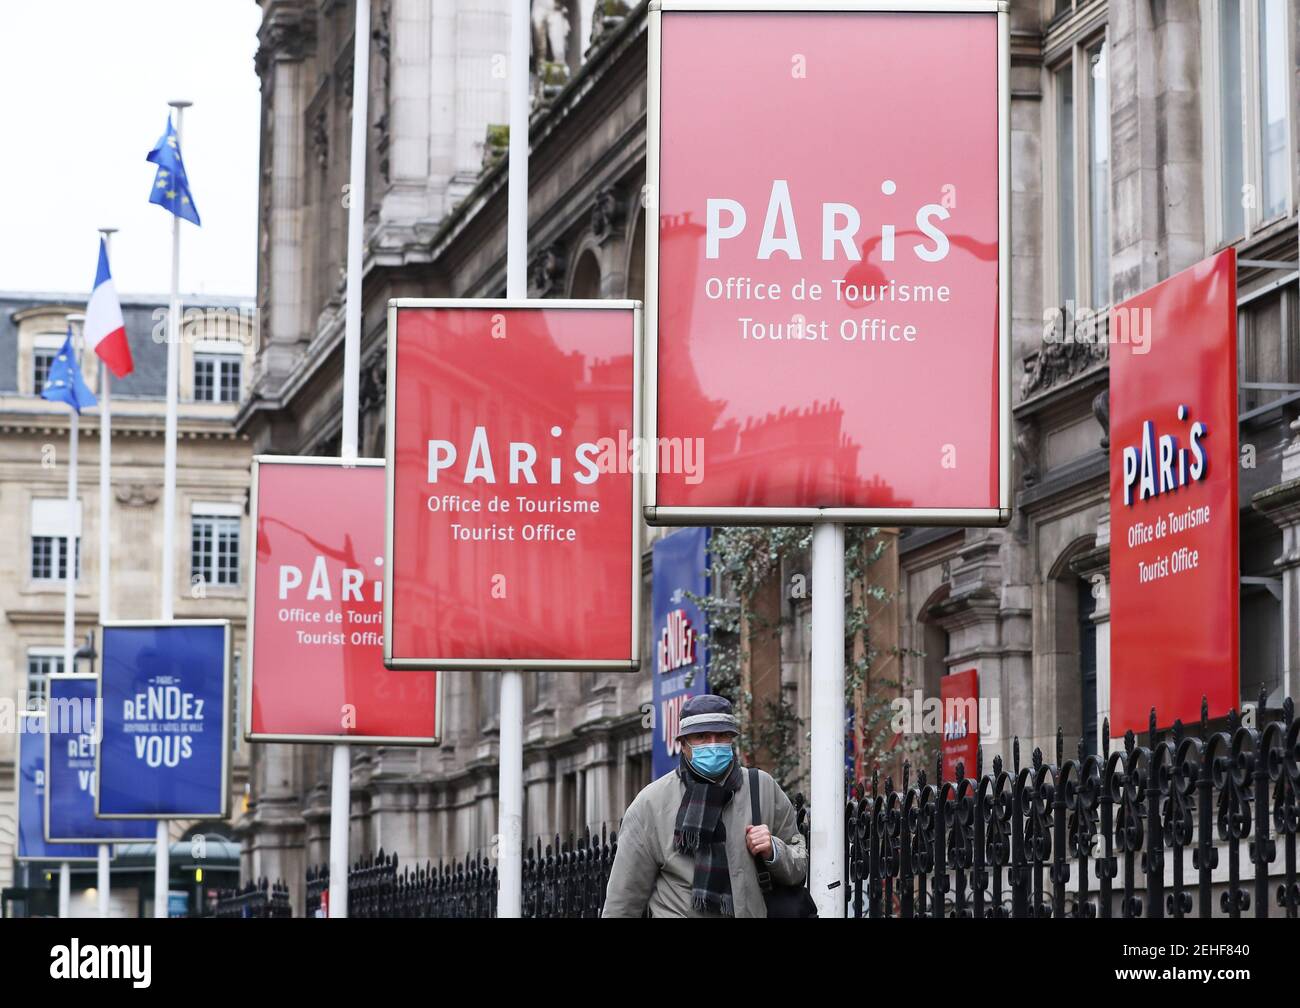 (210220) -- PARIS, Feb. 20, 2021 (Xinhua) -- A man wearing face mask walks past the Tourist Office located in the City Hall of Paris, France, Feb. 19, 2021. With 24,116 new infections confirmed in the last 24 hours, France has counted an accumulative total of 3,560,764 COVID-19 cases as of Friday, according to data from the French Public Health Agency. In a video conference with lawmakers from the ruling The Republic on the Move (LERM) party, President Emmanuel Macron said 'it's still too early to decide' whether to ease or tighten restrictions. 'We can consider hypotheses within 8 to 10 Stock Photo